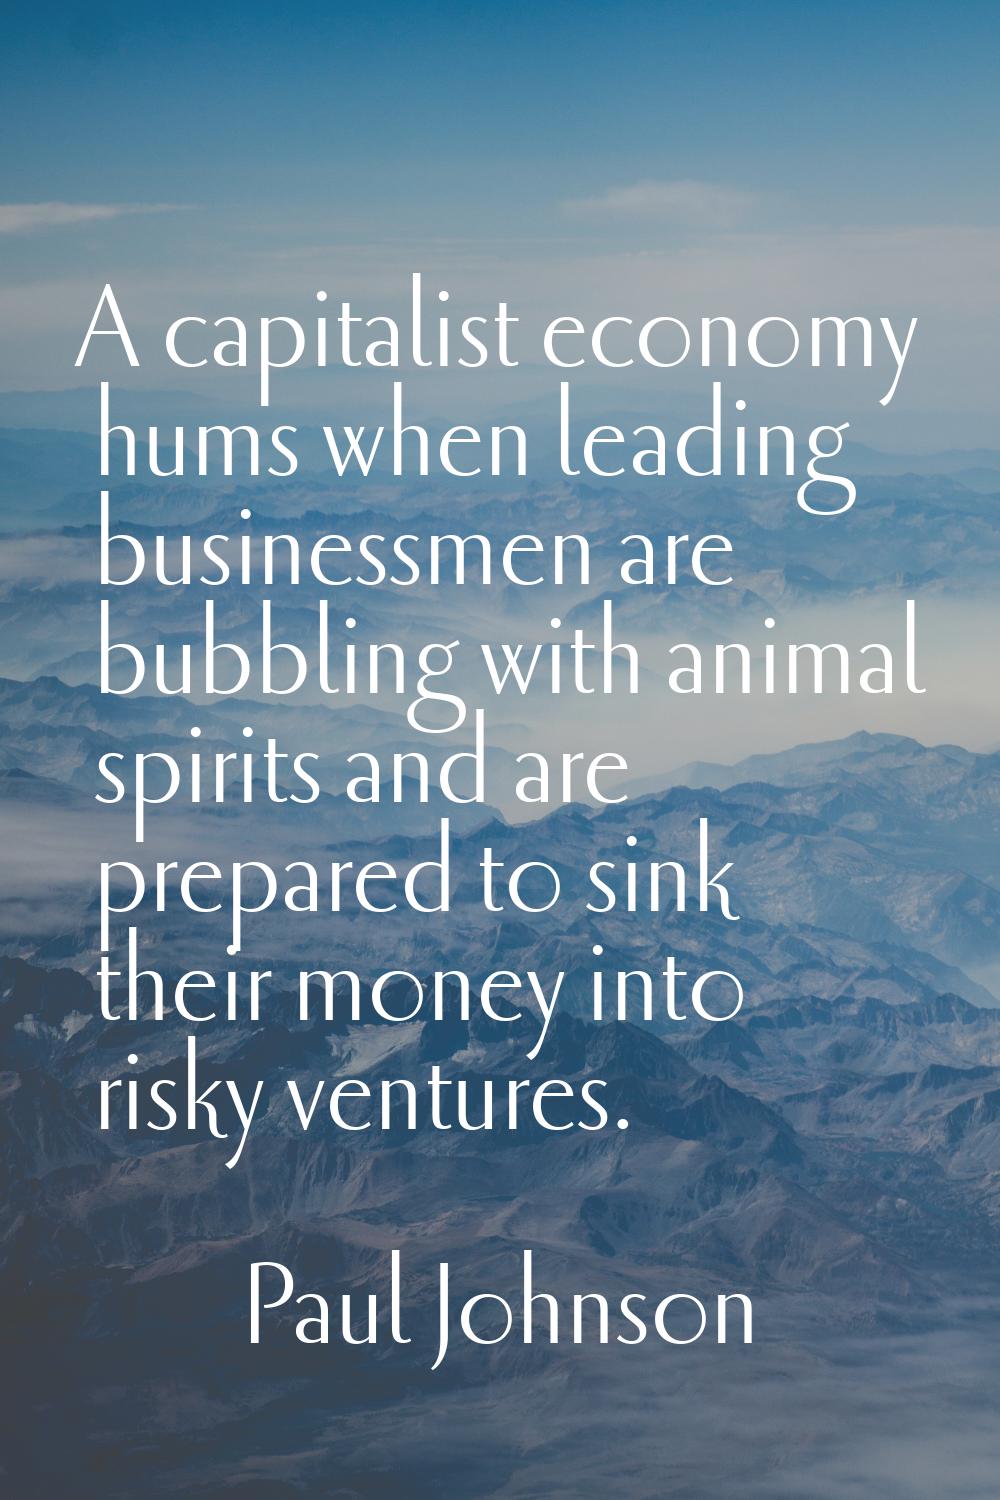 A capitalist economy hums when leading businessmen are bubbling with animal spirits and are prepare